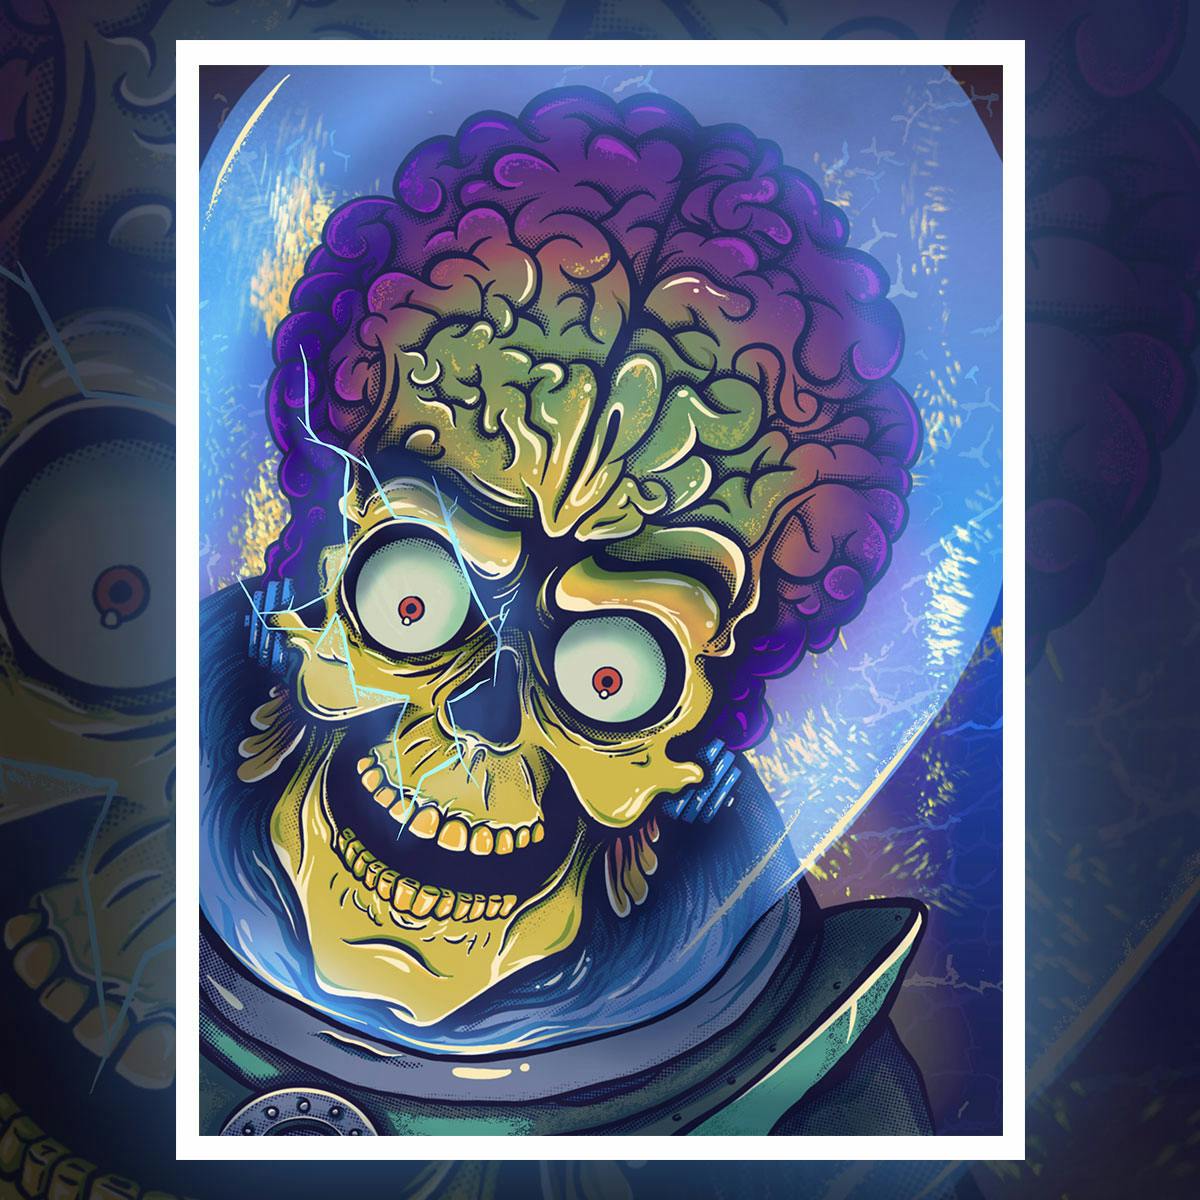 A procreate illustration of the lead Alien from Mars Attacks created by Ian Steele